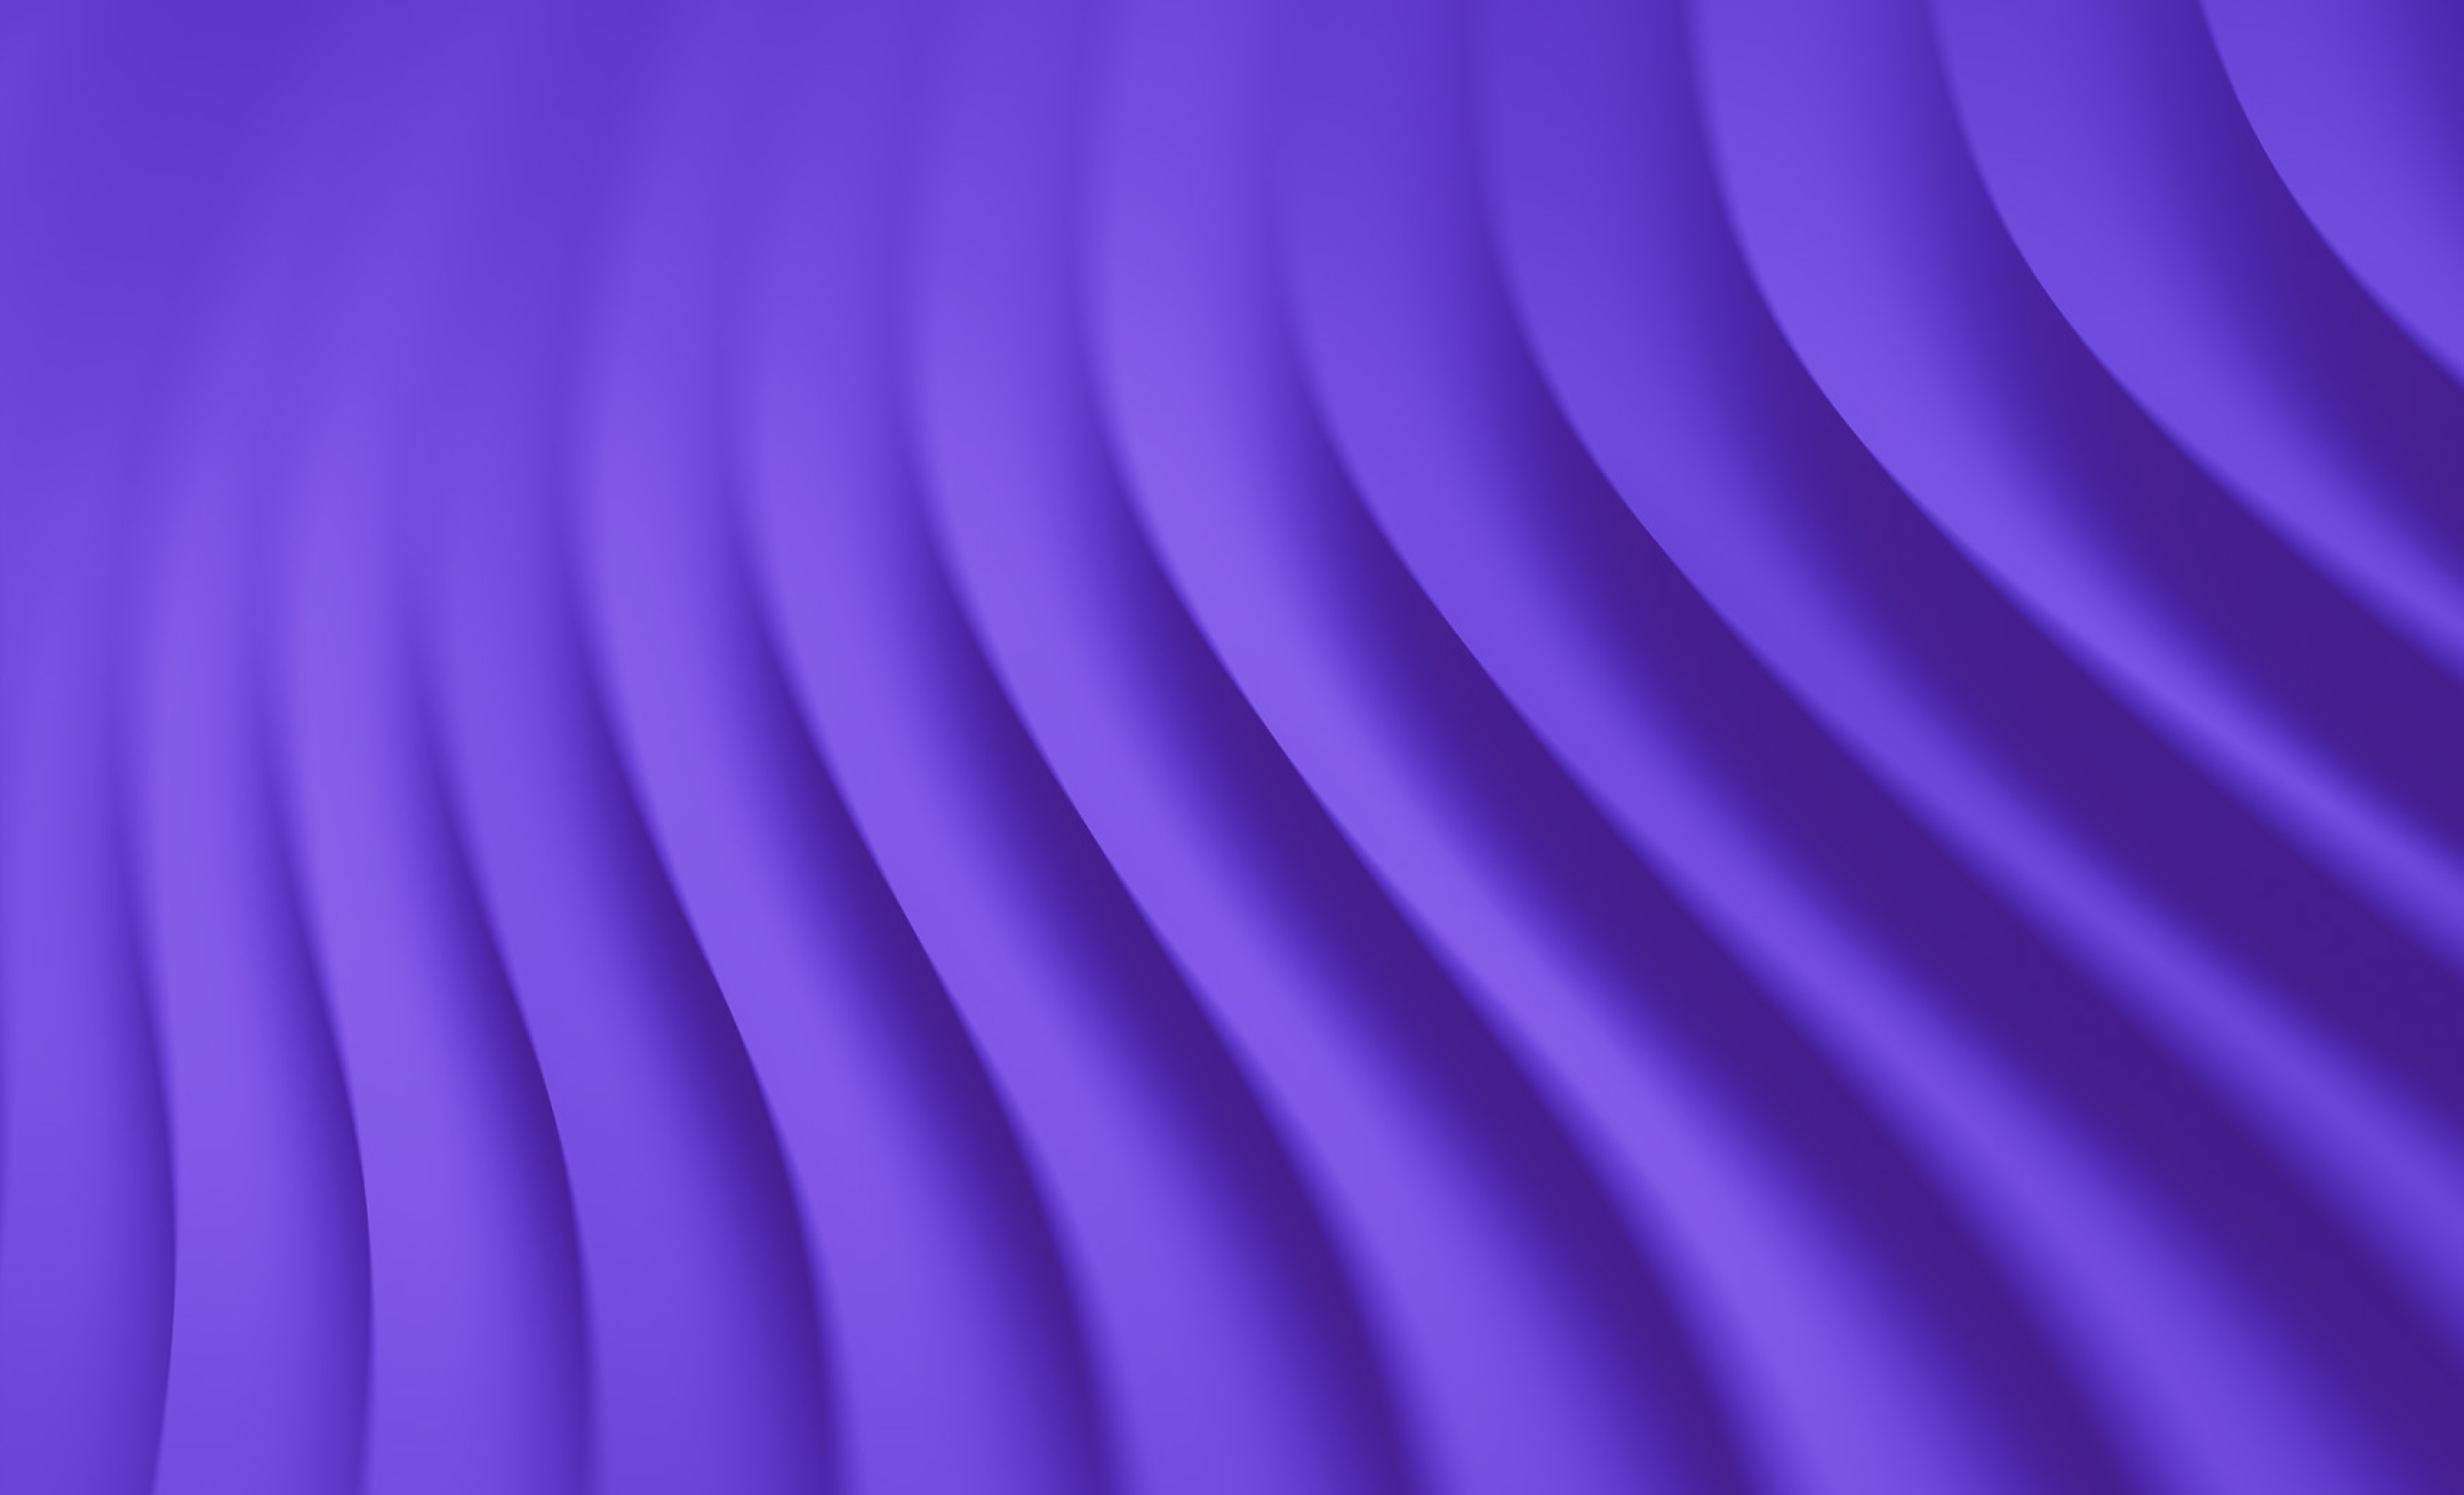 Abstract image in purple colours representing movement.